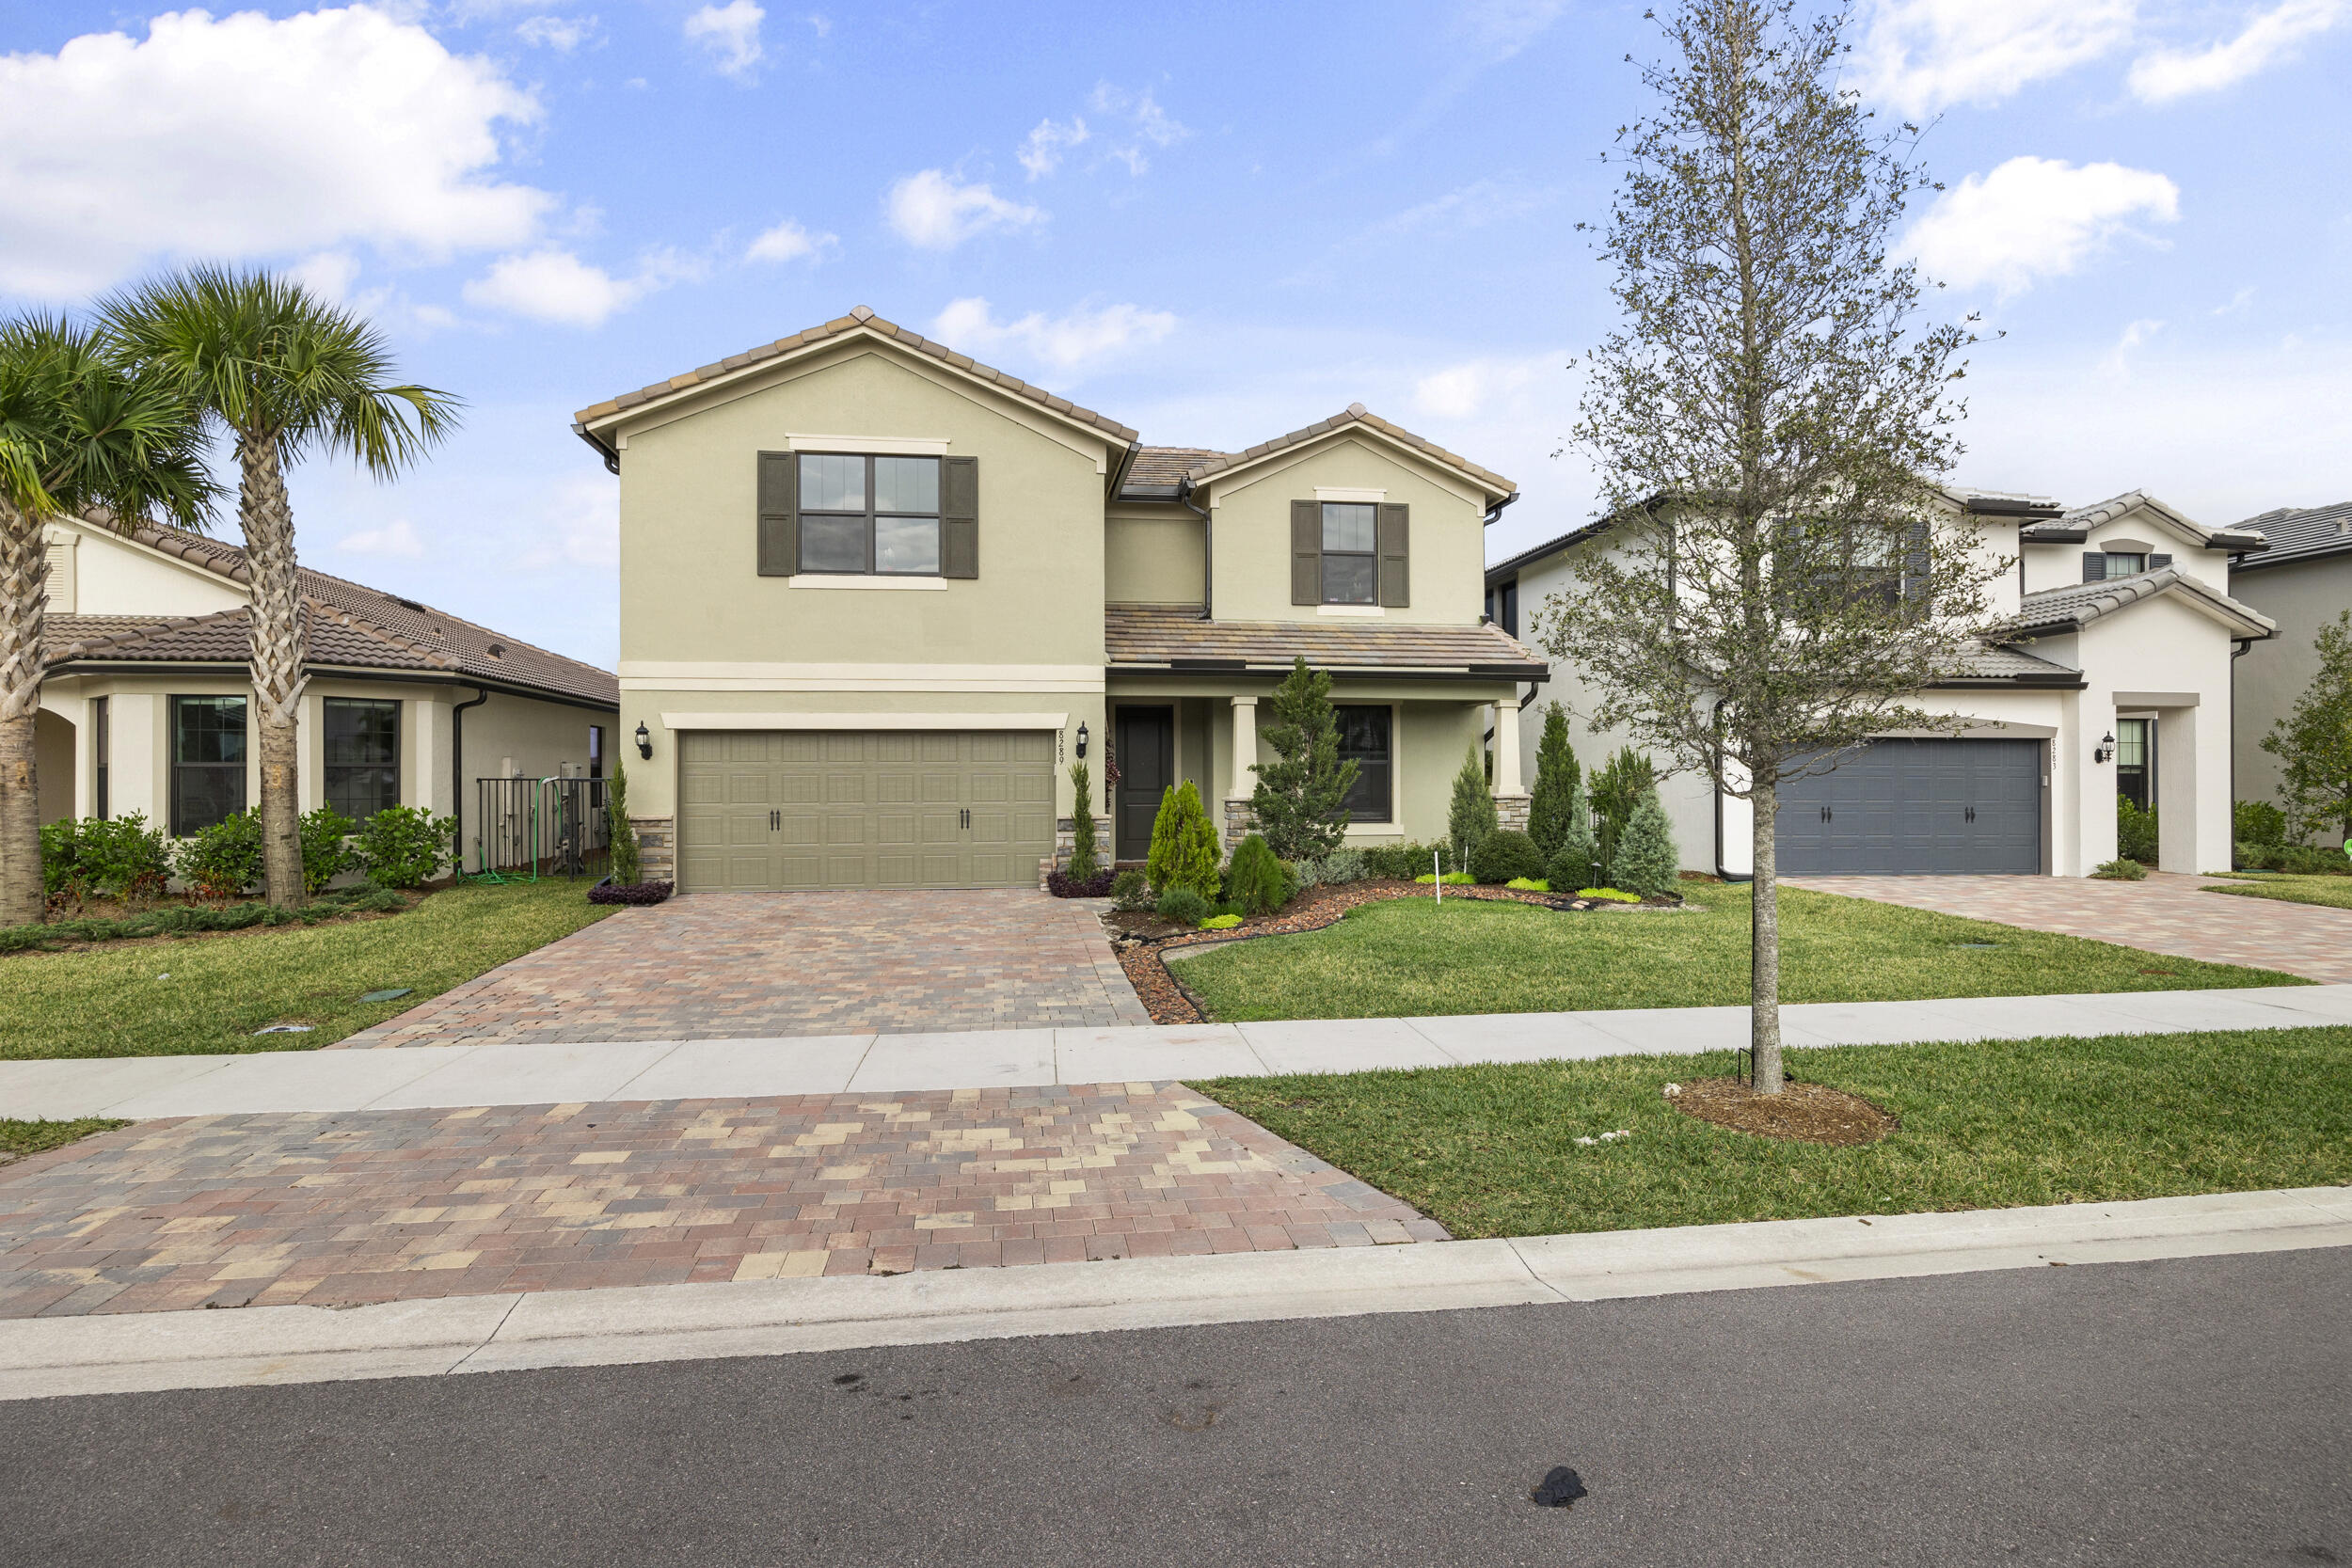 8289 Vaulting Drive, Lake Worth, Palm Beach County, Florida - 4 Bedrooms  
3.5 Bathrooms - 